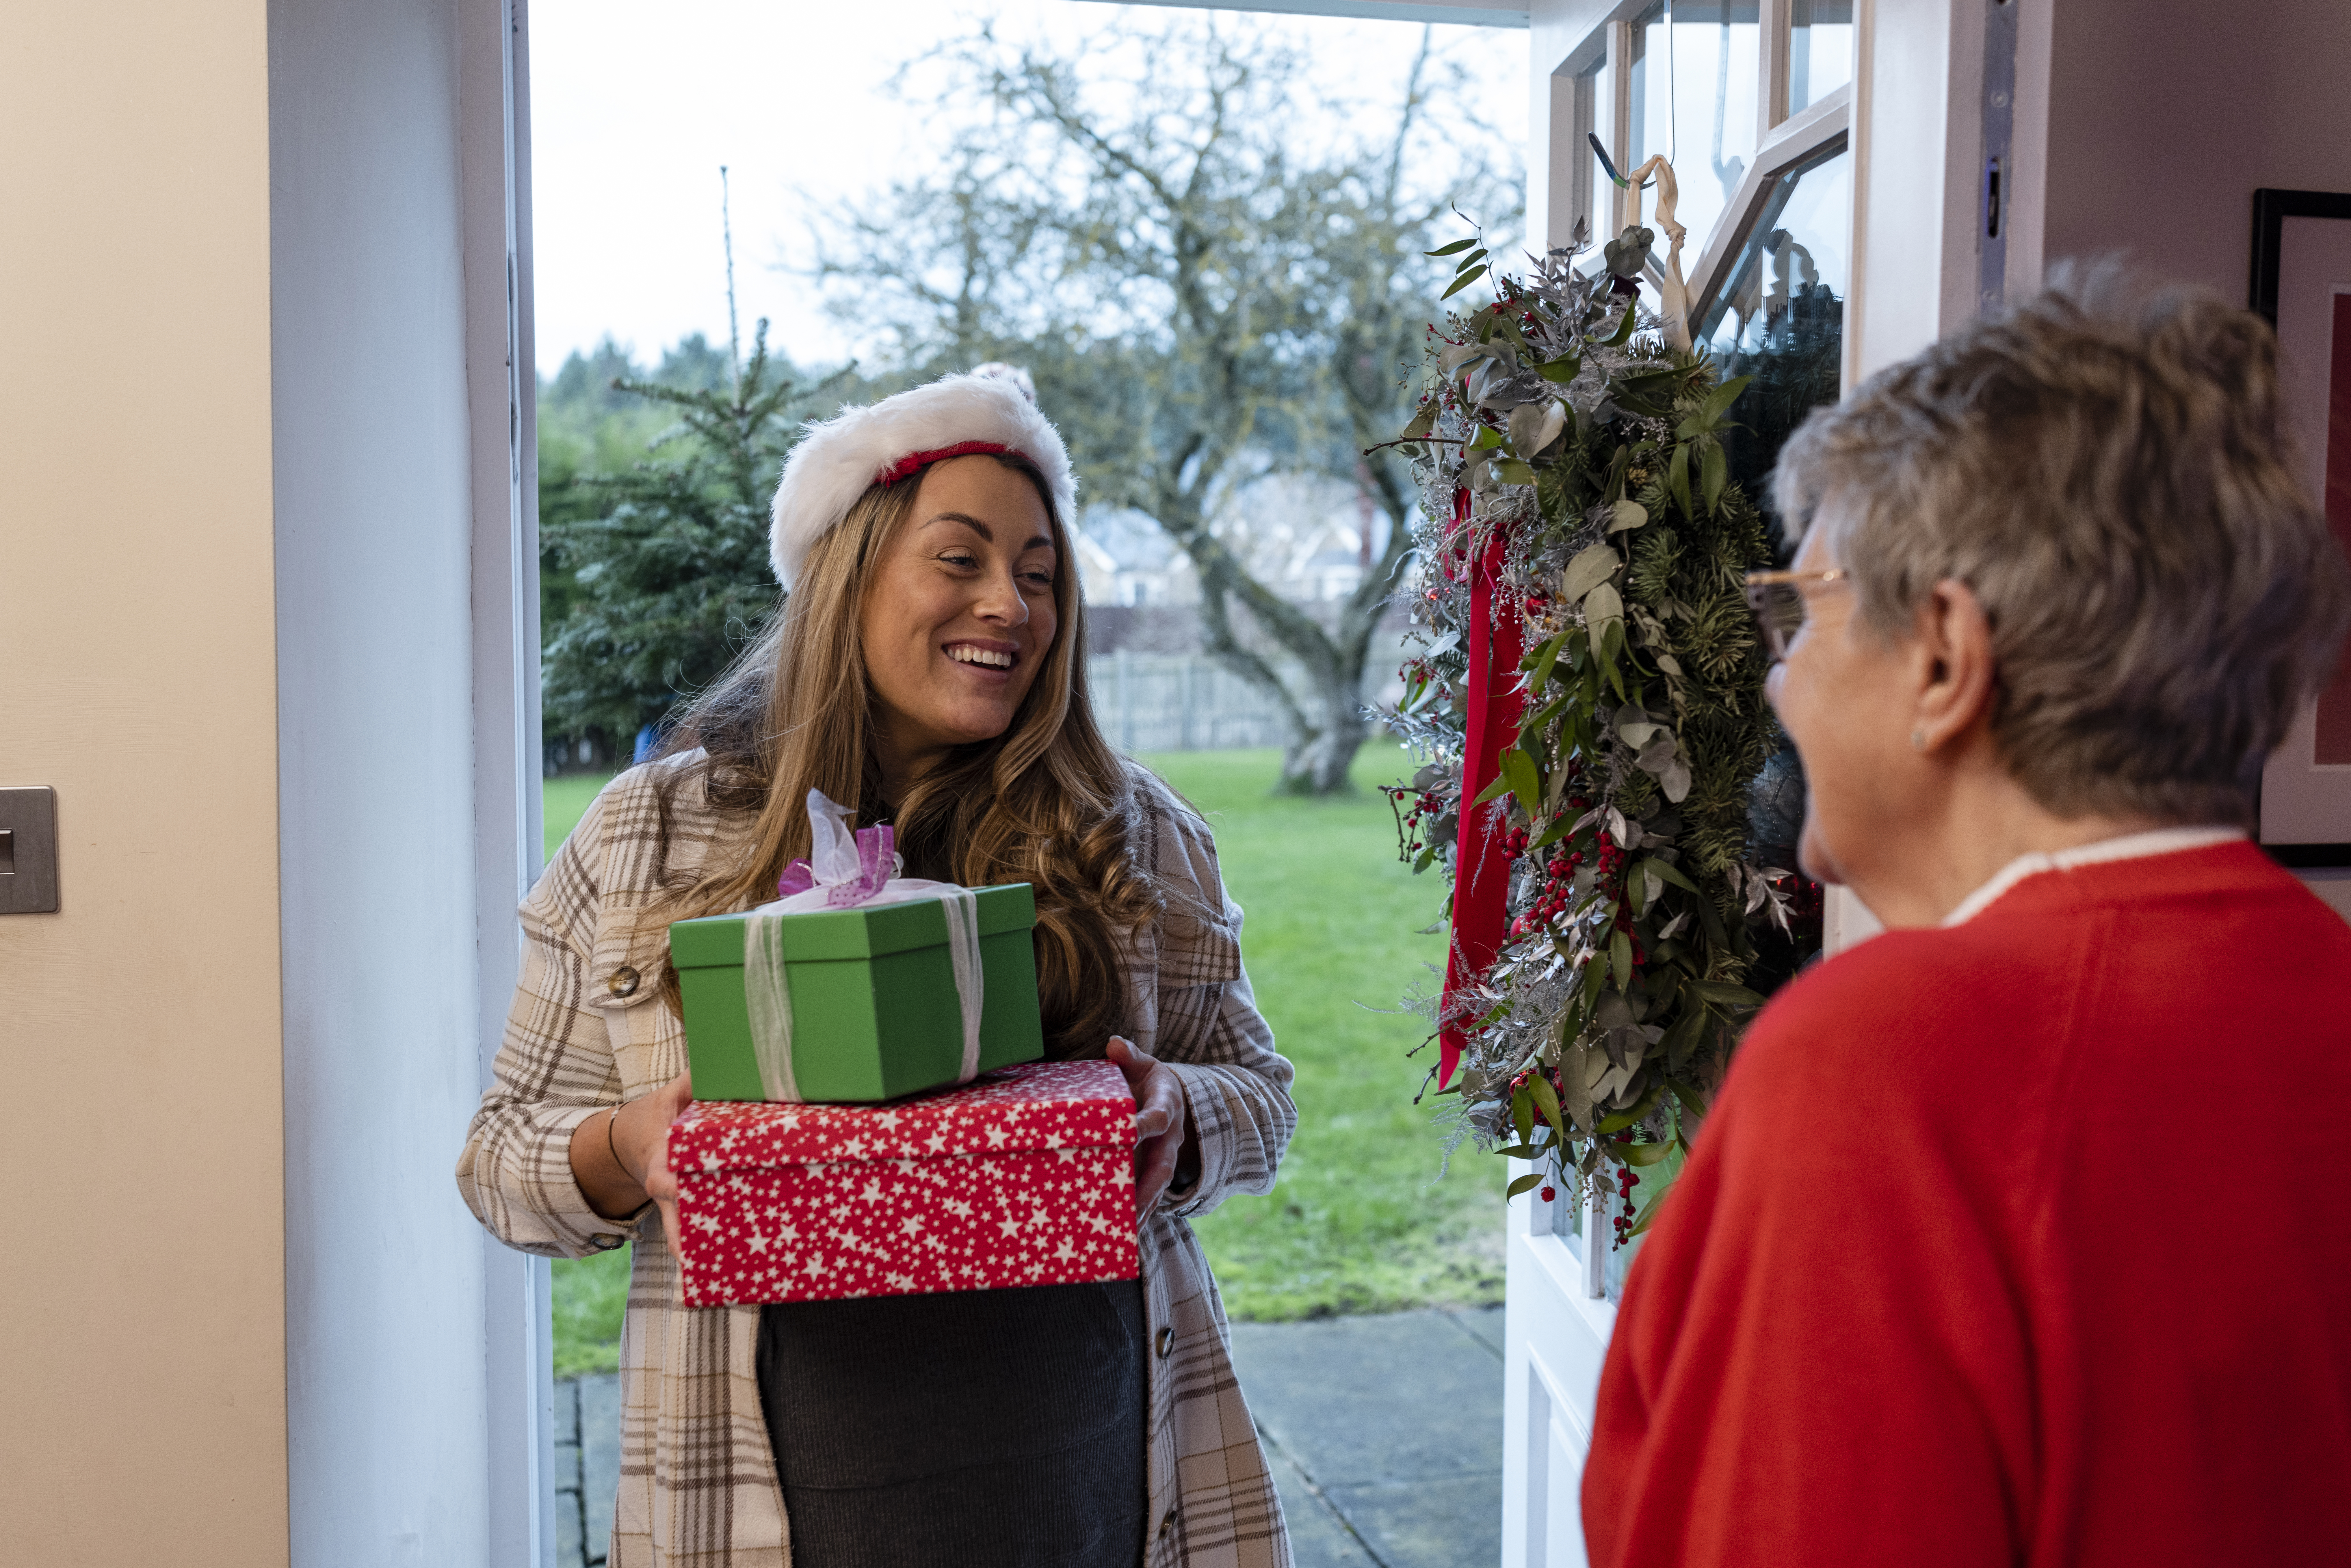 Returning a gift during the holidays? What to know before you do